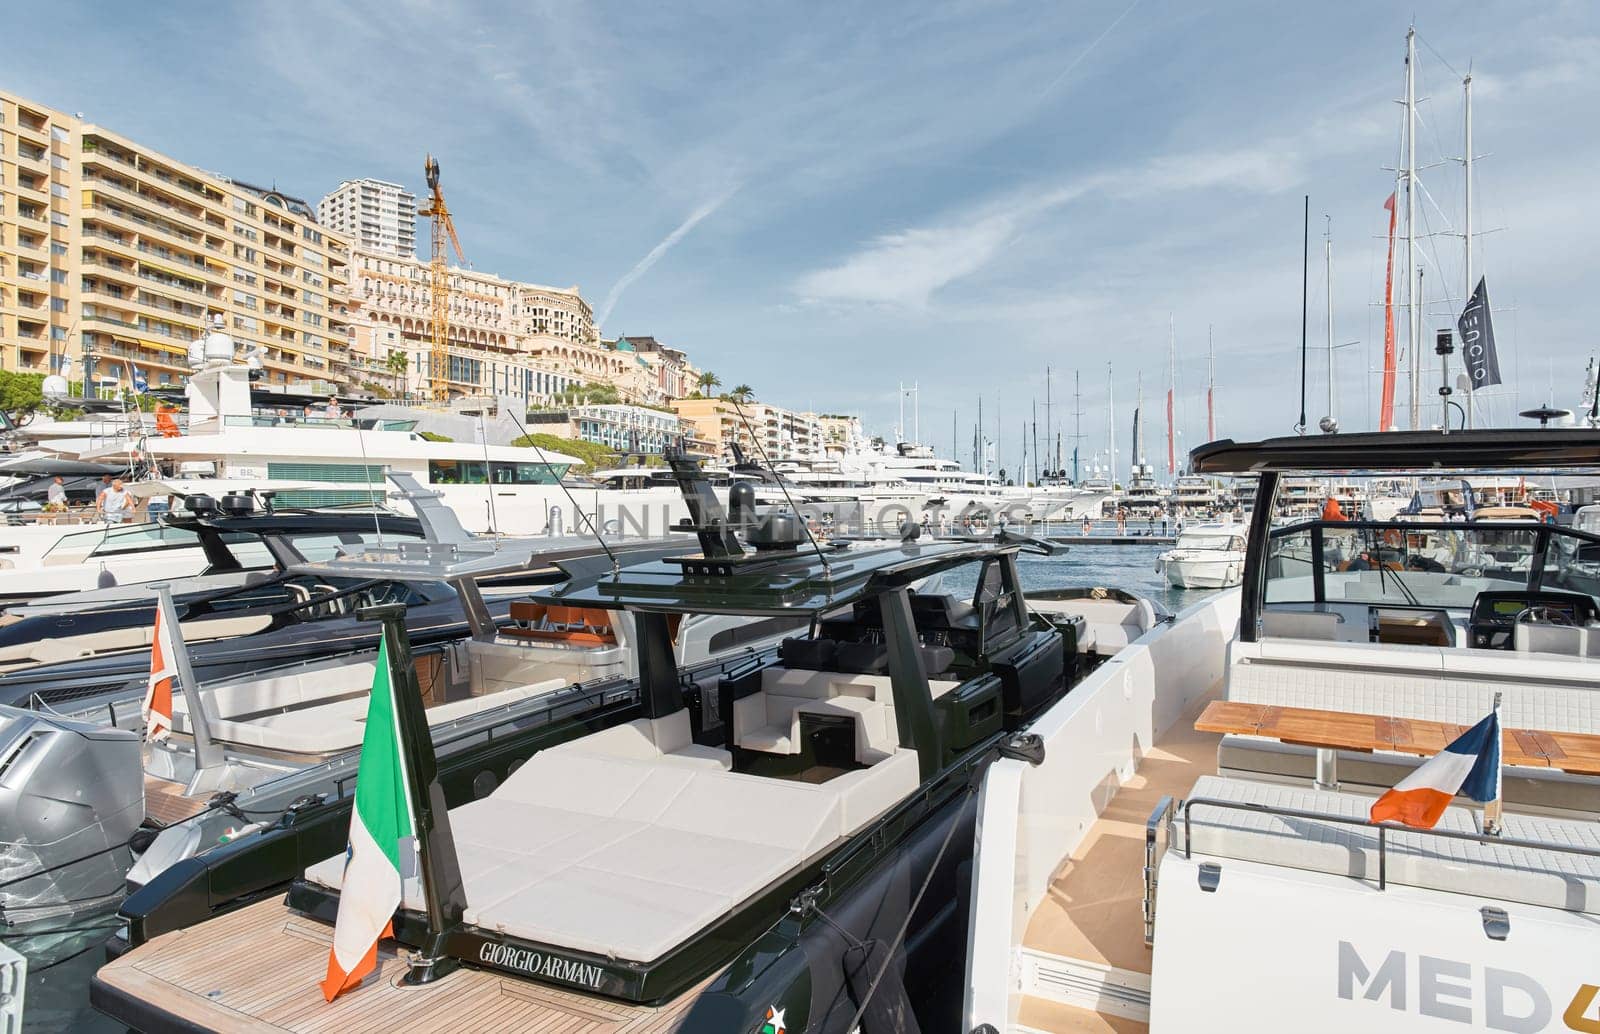 Monaco, Monte Carlo, 29 September 2022 - Close-up view of a relaxation area on the open teak deck of an expensive motorboat on famous boating exhibition at sunny day, yacht show, wealth life. High quality photo